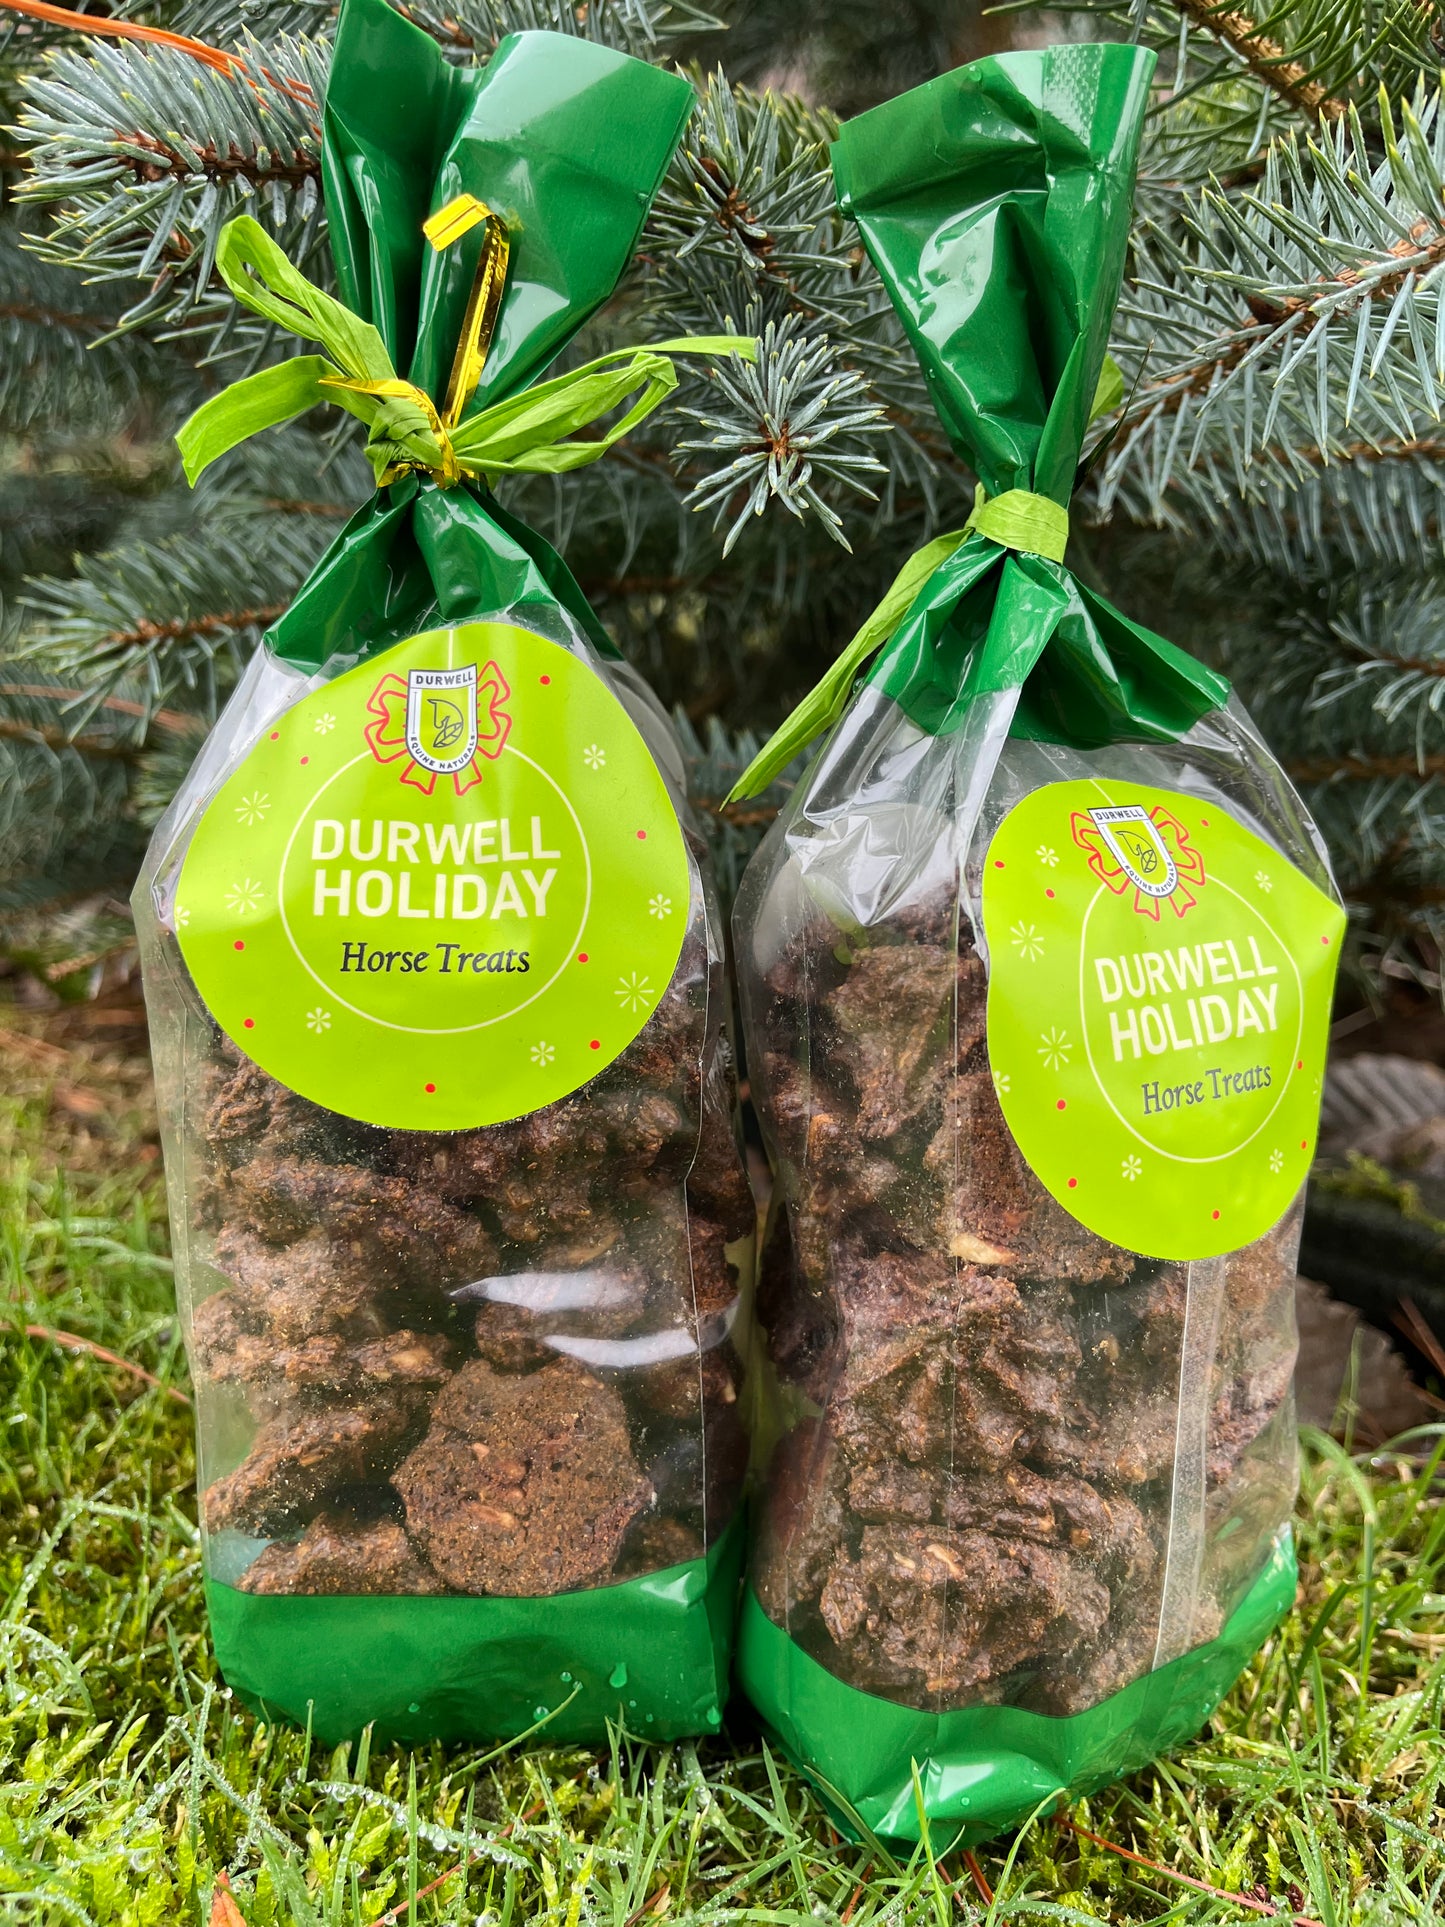 Durwell holiday horse treats